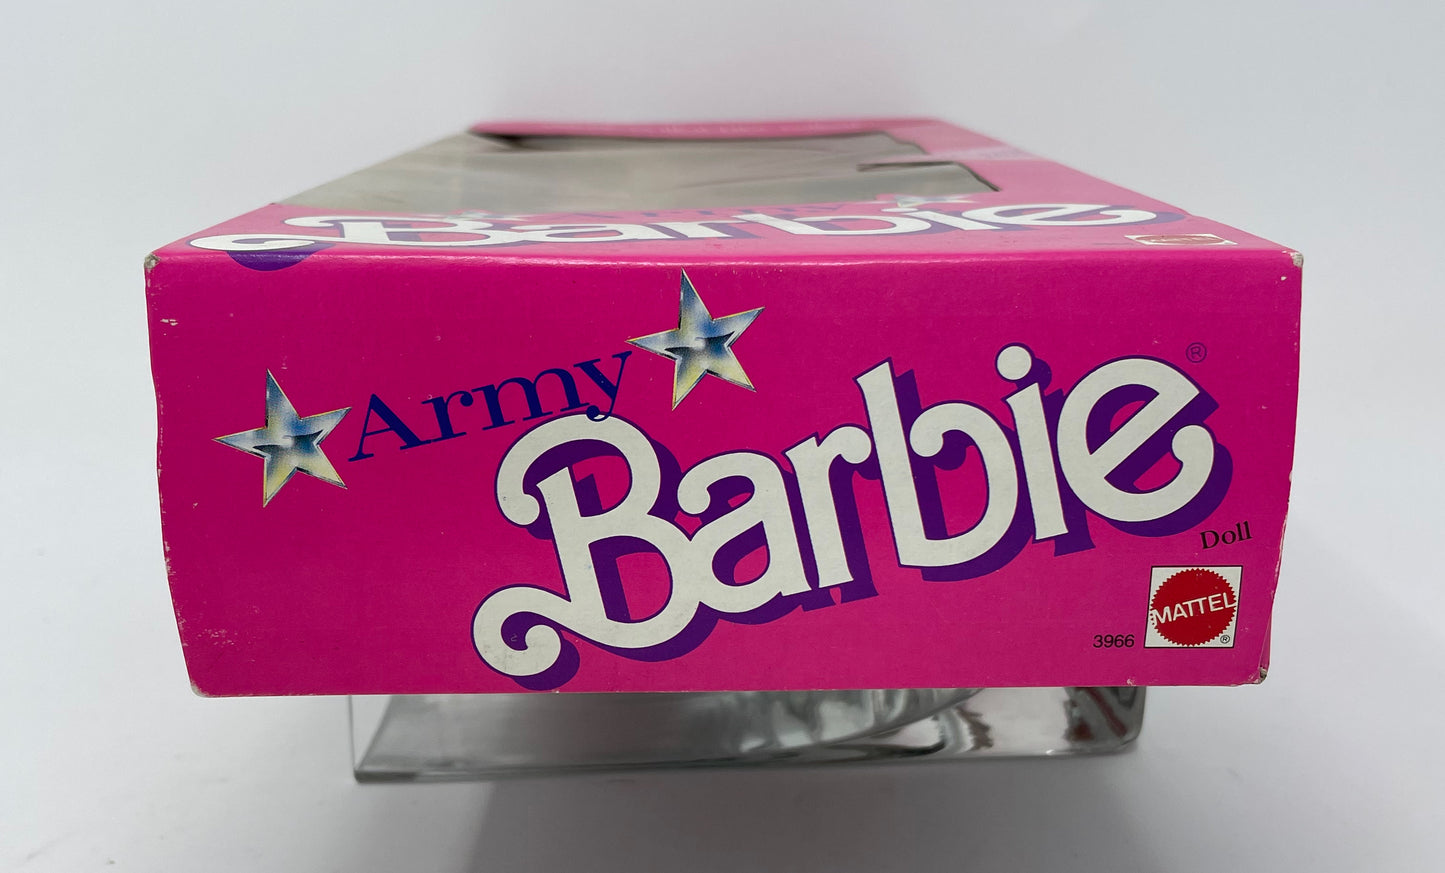 BARBIE - ARMY BARBIE - AMERICAN BEAUTY COLLECTION - MATTEL 1989